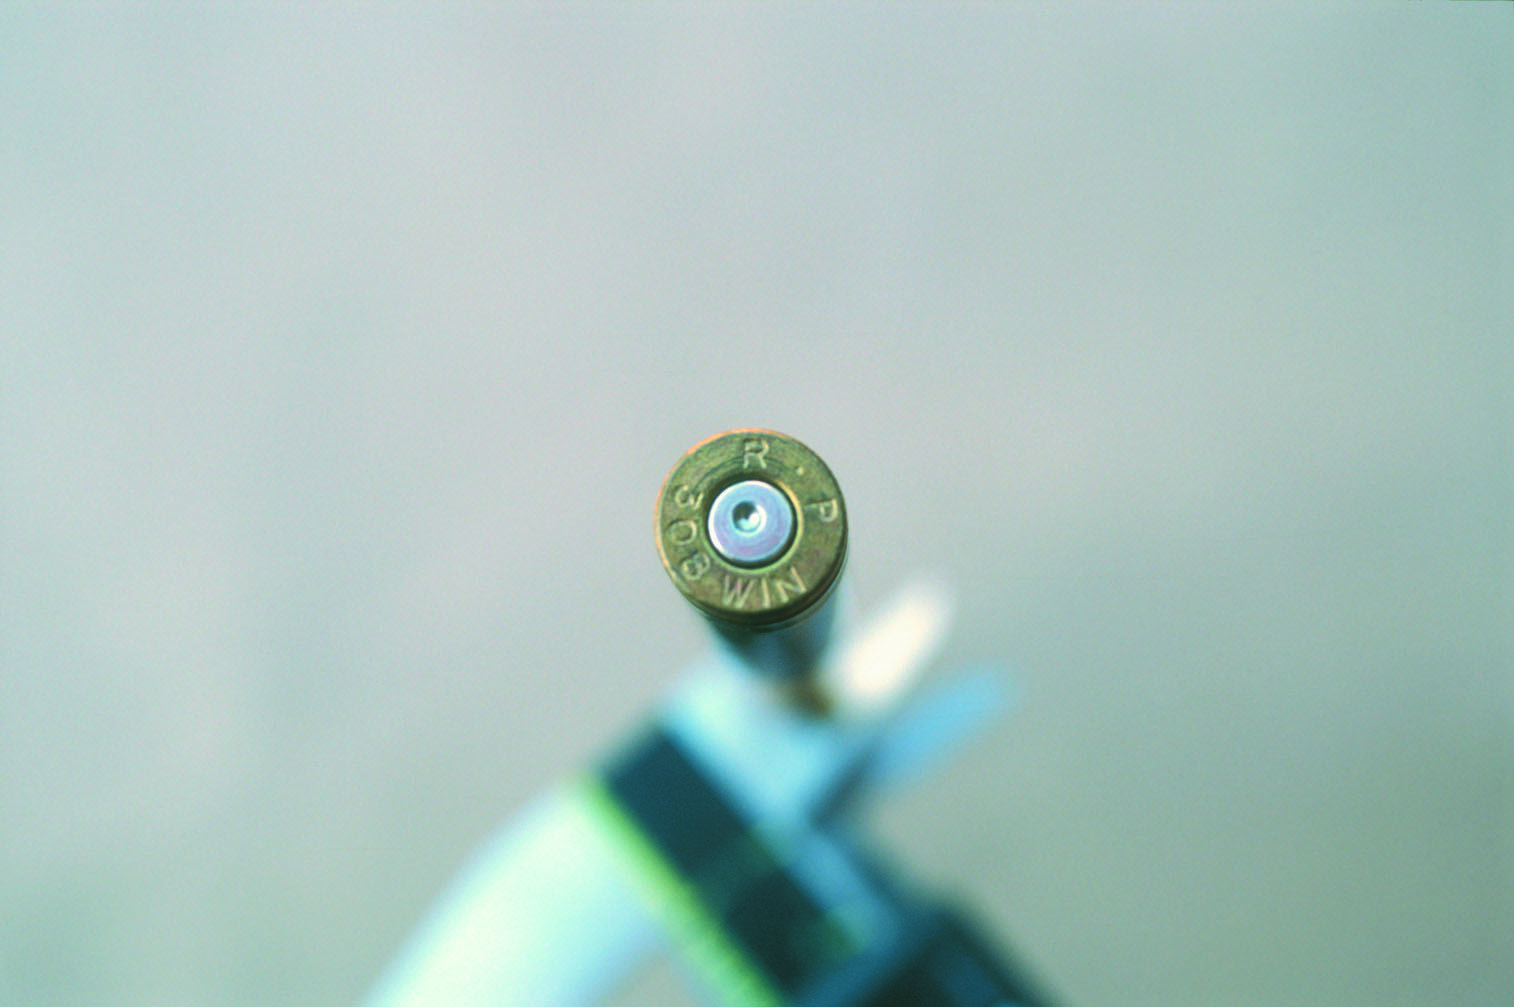 Flattened primers are common with factory ammunition and are not an indicator of high or excess pressure. This Remington .308 Winchester load has a flattened primer but is completely safe.